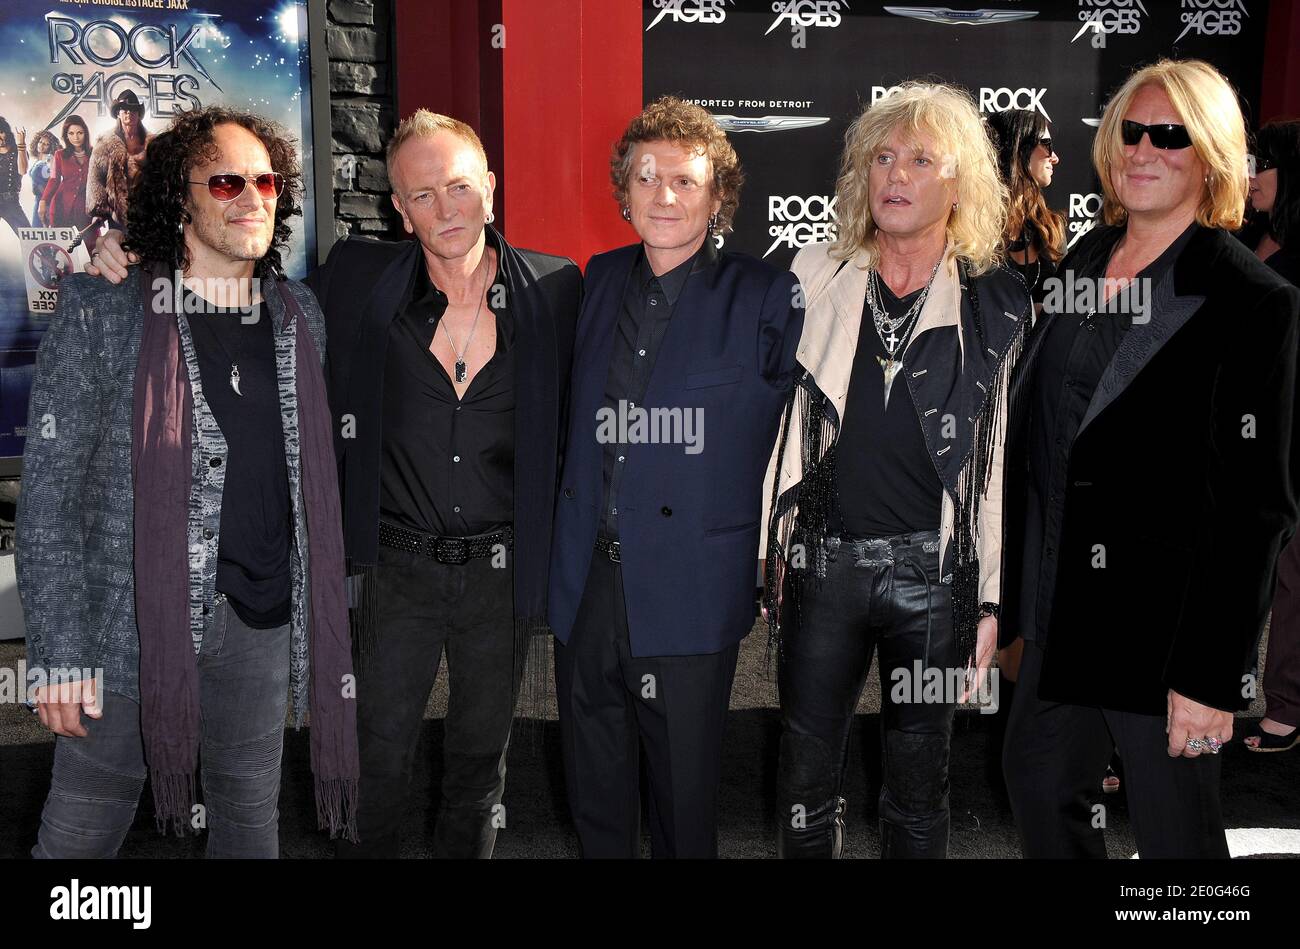 Def Leppard Phill Collen, Rick Allen, Rick Savage, Joe Elliott,Vivian Campbell arrive at the premiere of Warner Bros. Pictures' 'Rock of Ages' at Grauman's Chinese Theatre on June 8, 2012 in Los Angeles, CA, USA. Photo by Lionel Hahn/ABACAPRESS.COM Stock Photo